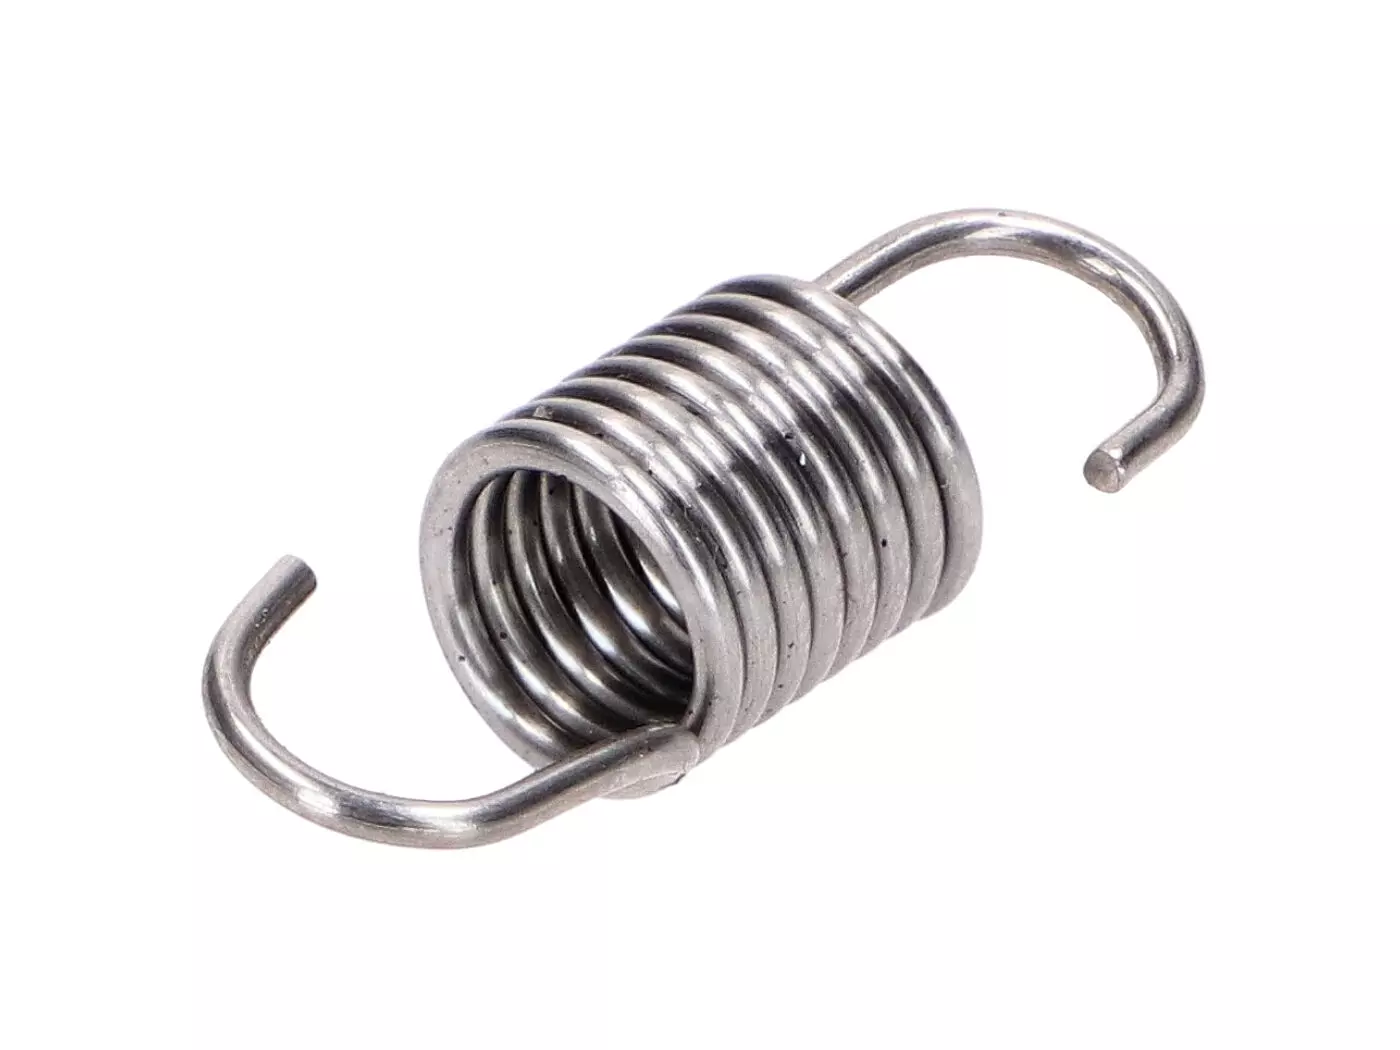 Headlight / Gear Shift Claw Spring For Simson S50, S51, SR50, M500 Engine